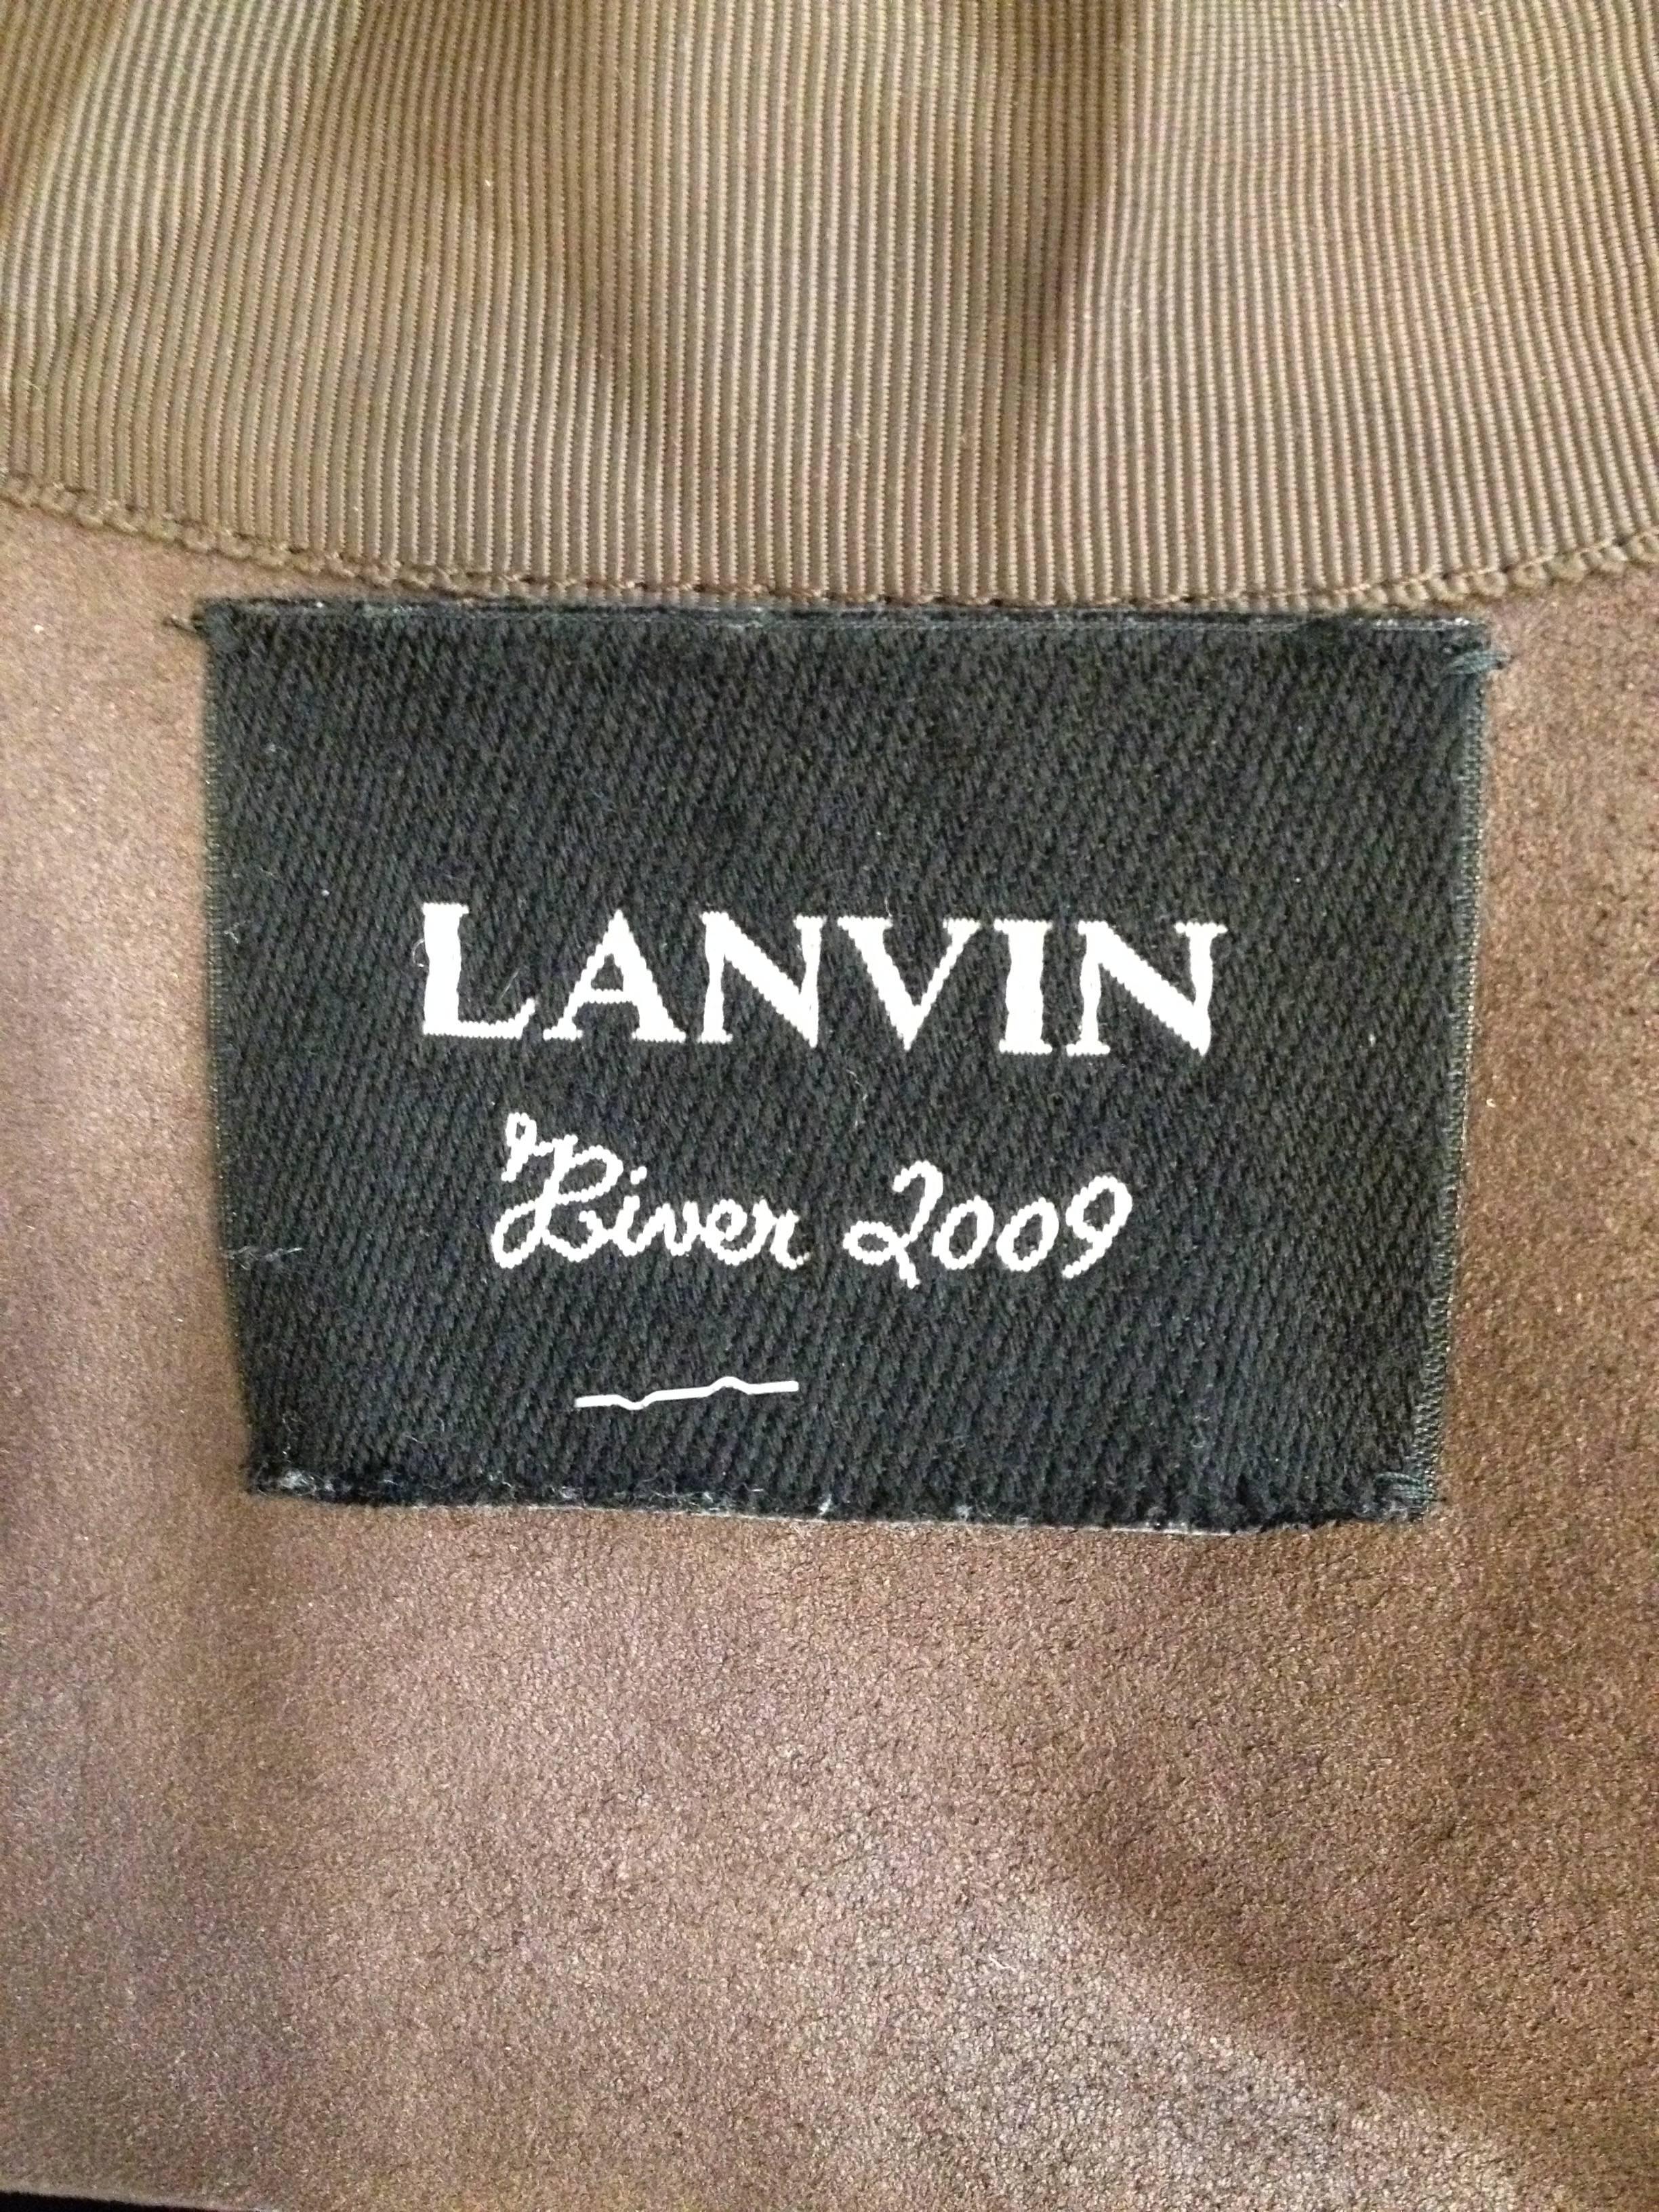 Lanvin Brown Suede Belted Coat Size 38 (6) For Sale 5